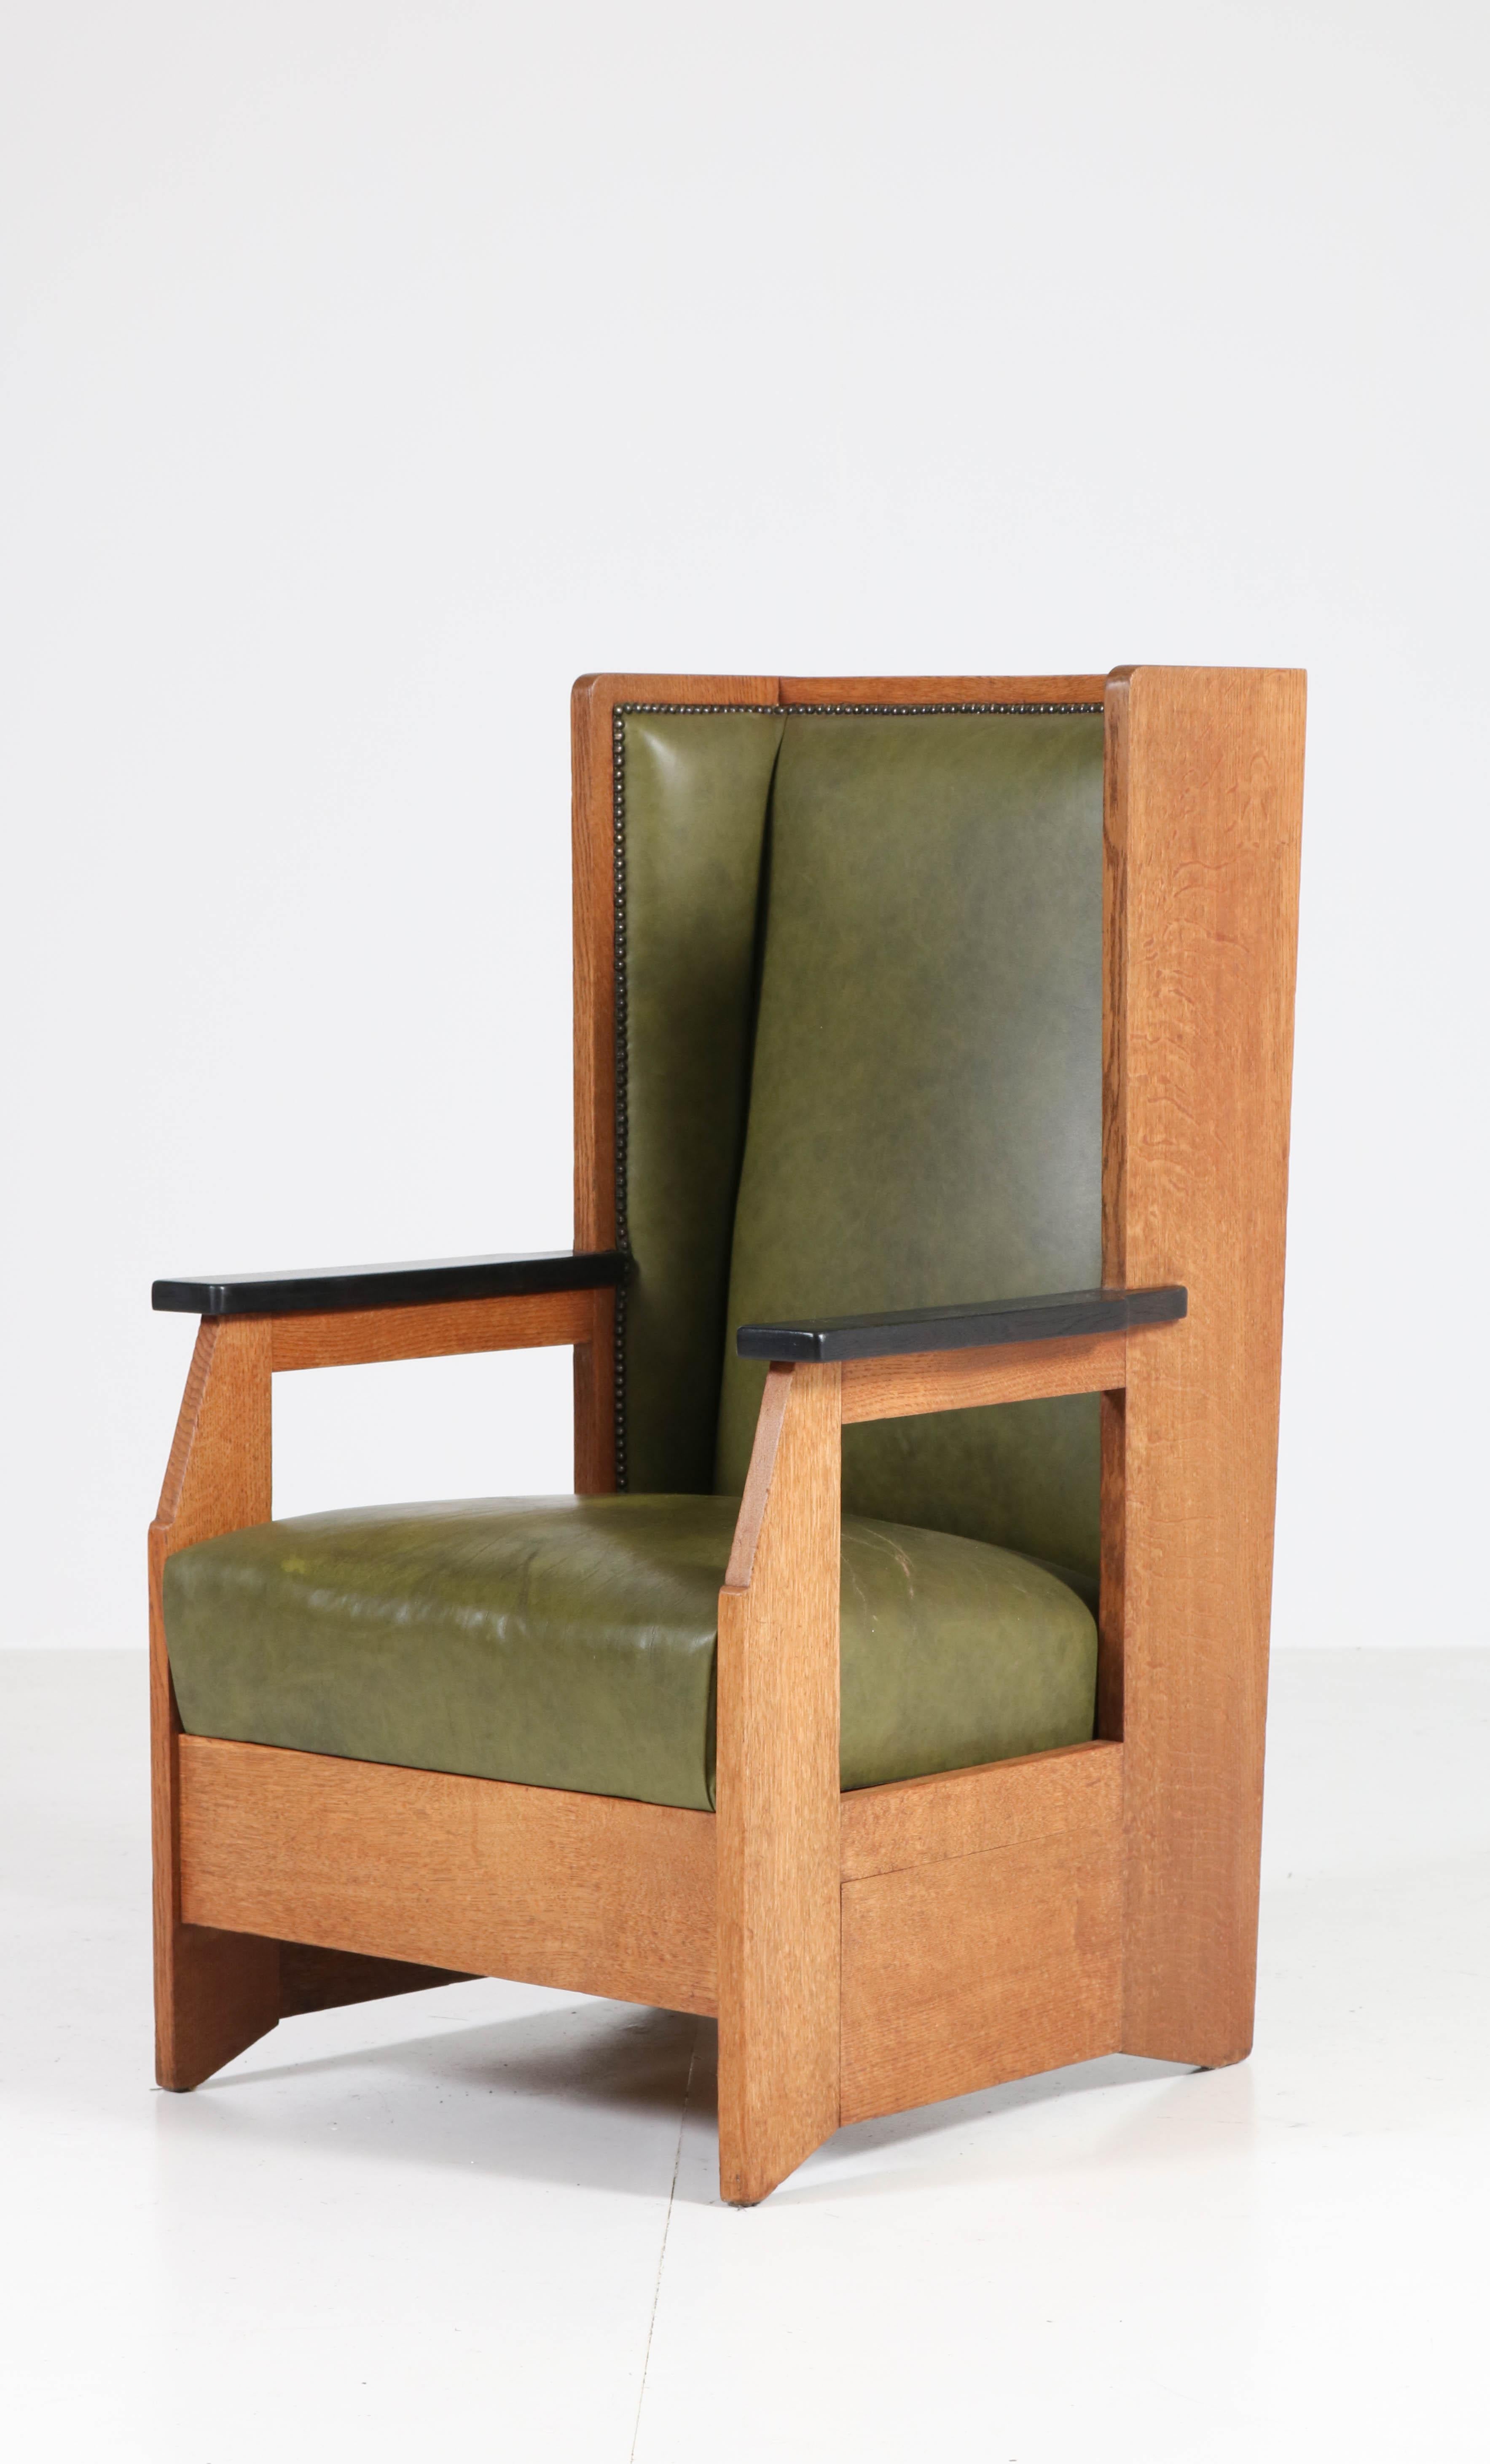 Leather Oak Art Deco Haagse School Wingback Chair by Henk Wouda for Pander, 1924